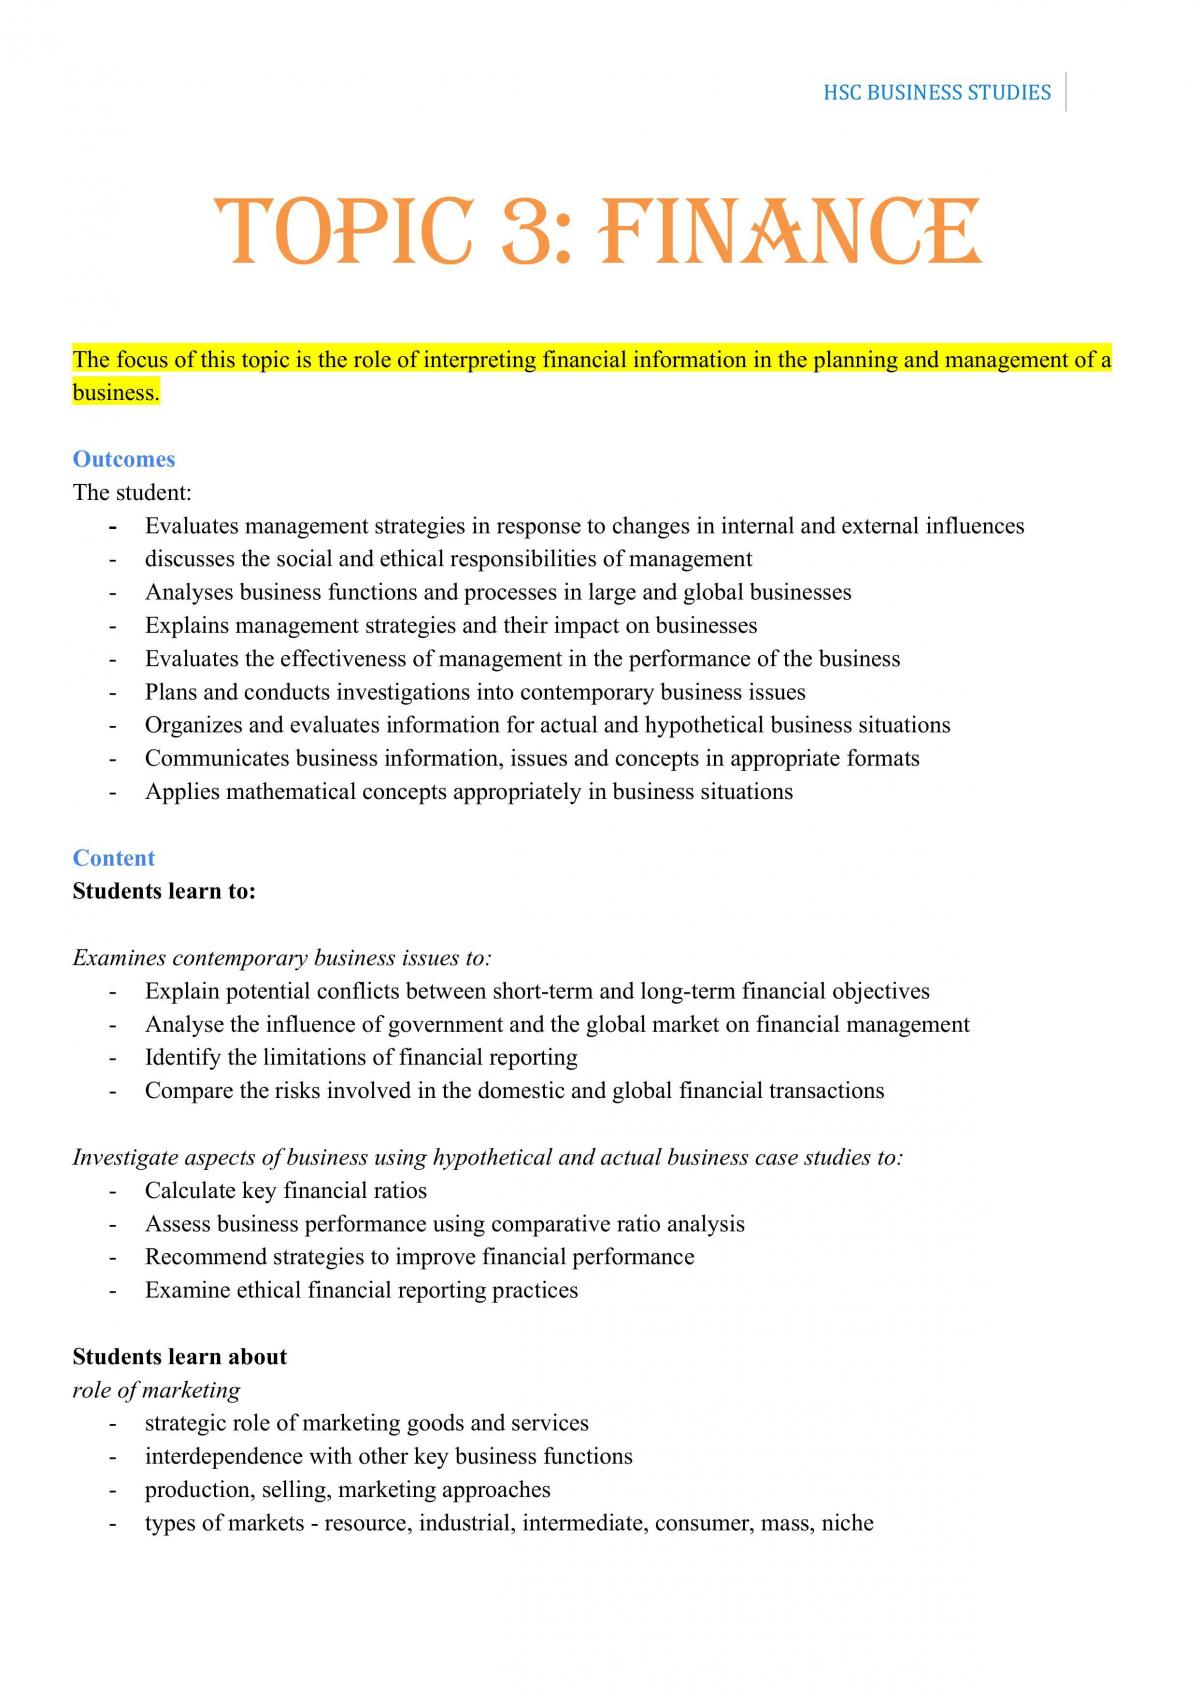 thesis topic about finance